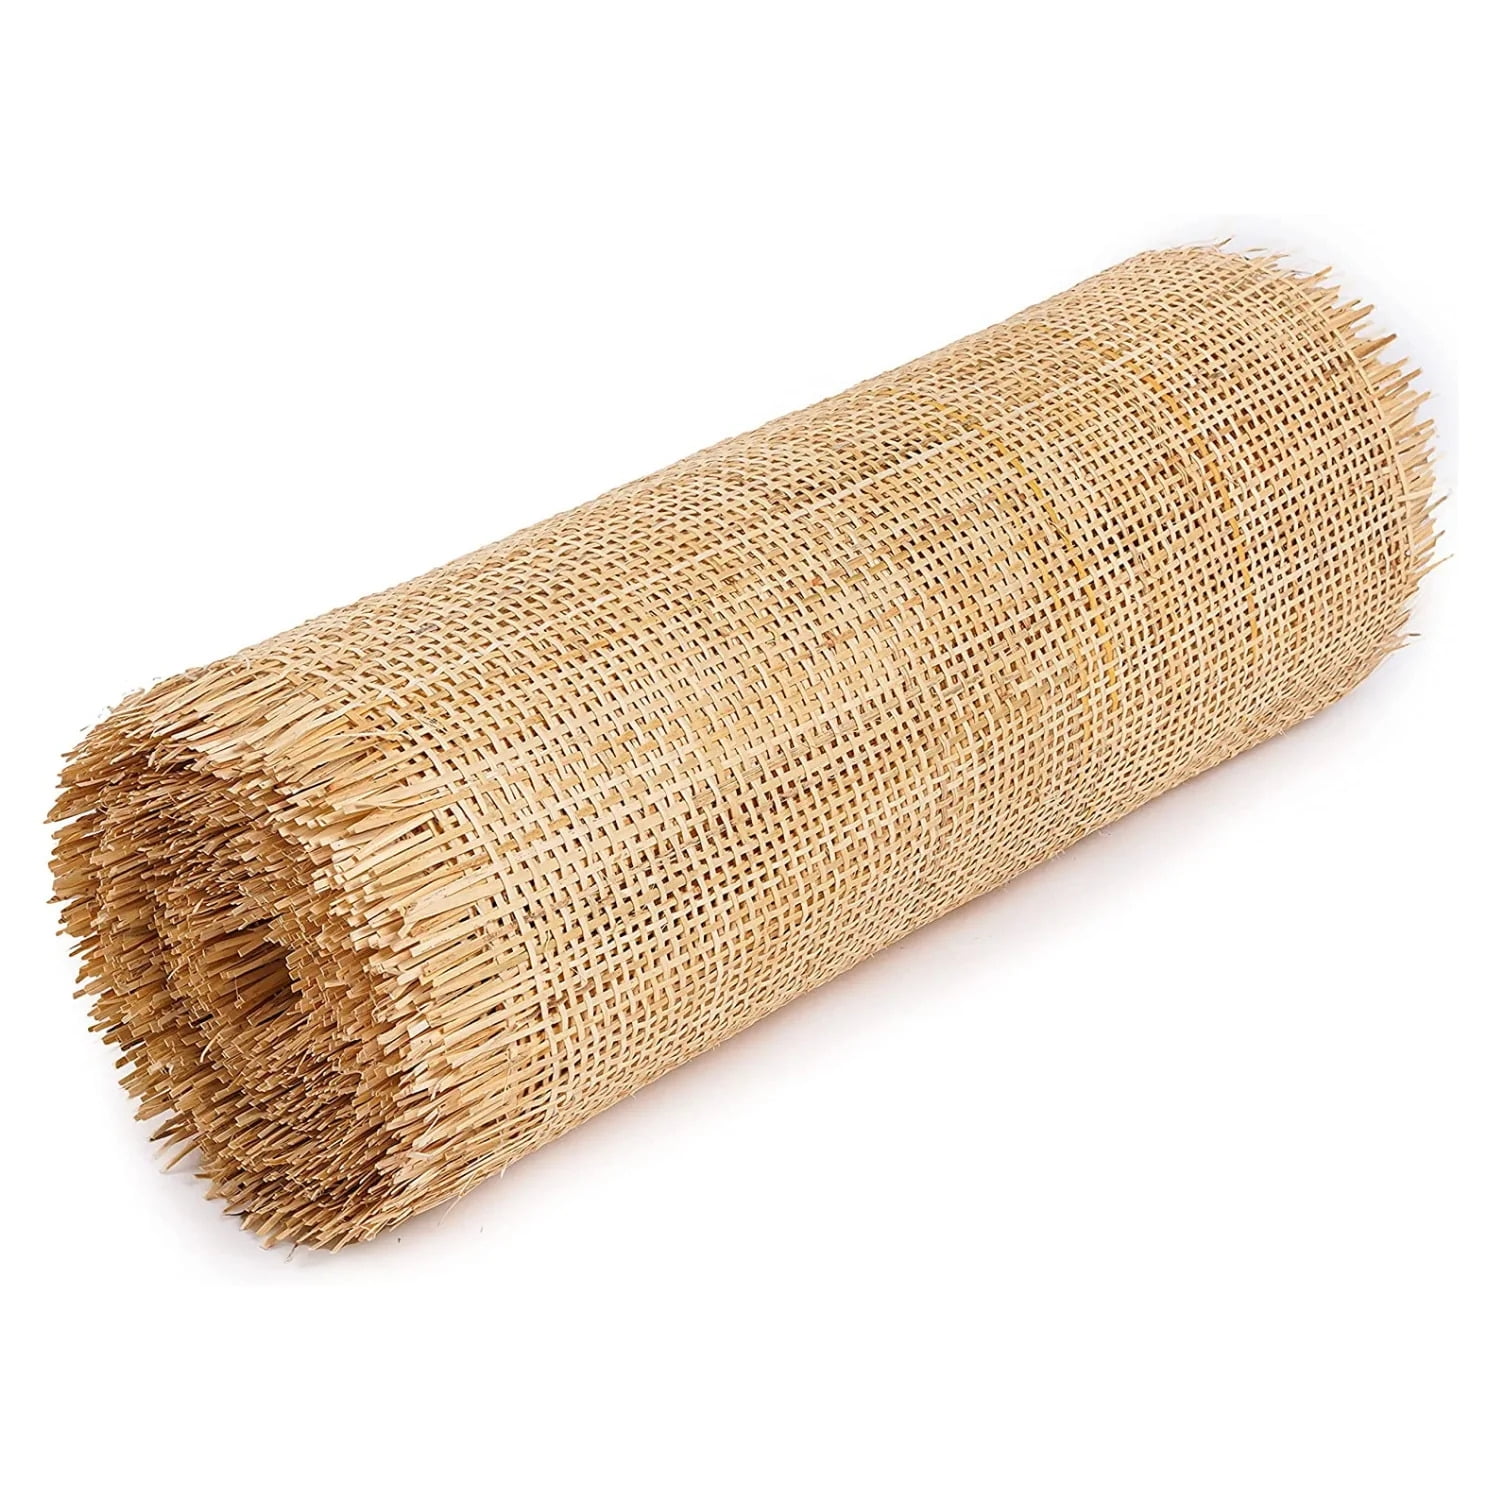 36 Wide Semi-Bleached Rattan Square Cane Webbing Radio Mesh Caning Material  For Chairs, Cabinet, Door -Open Weave Wicker Woven Rattan Sheets 